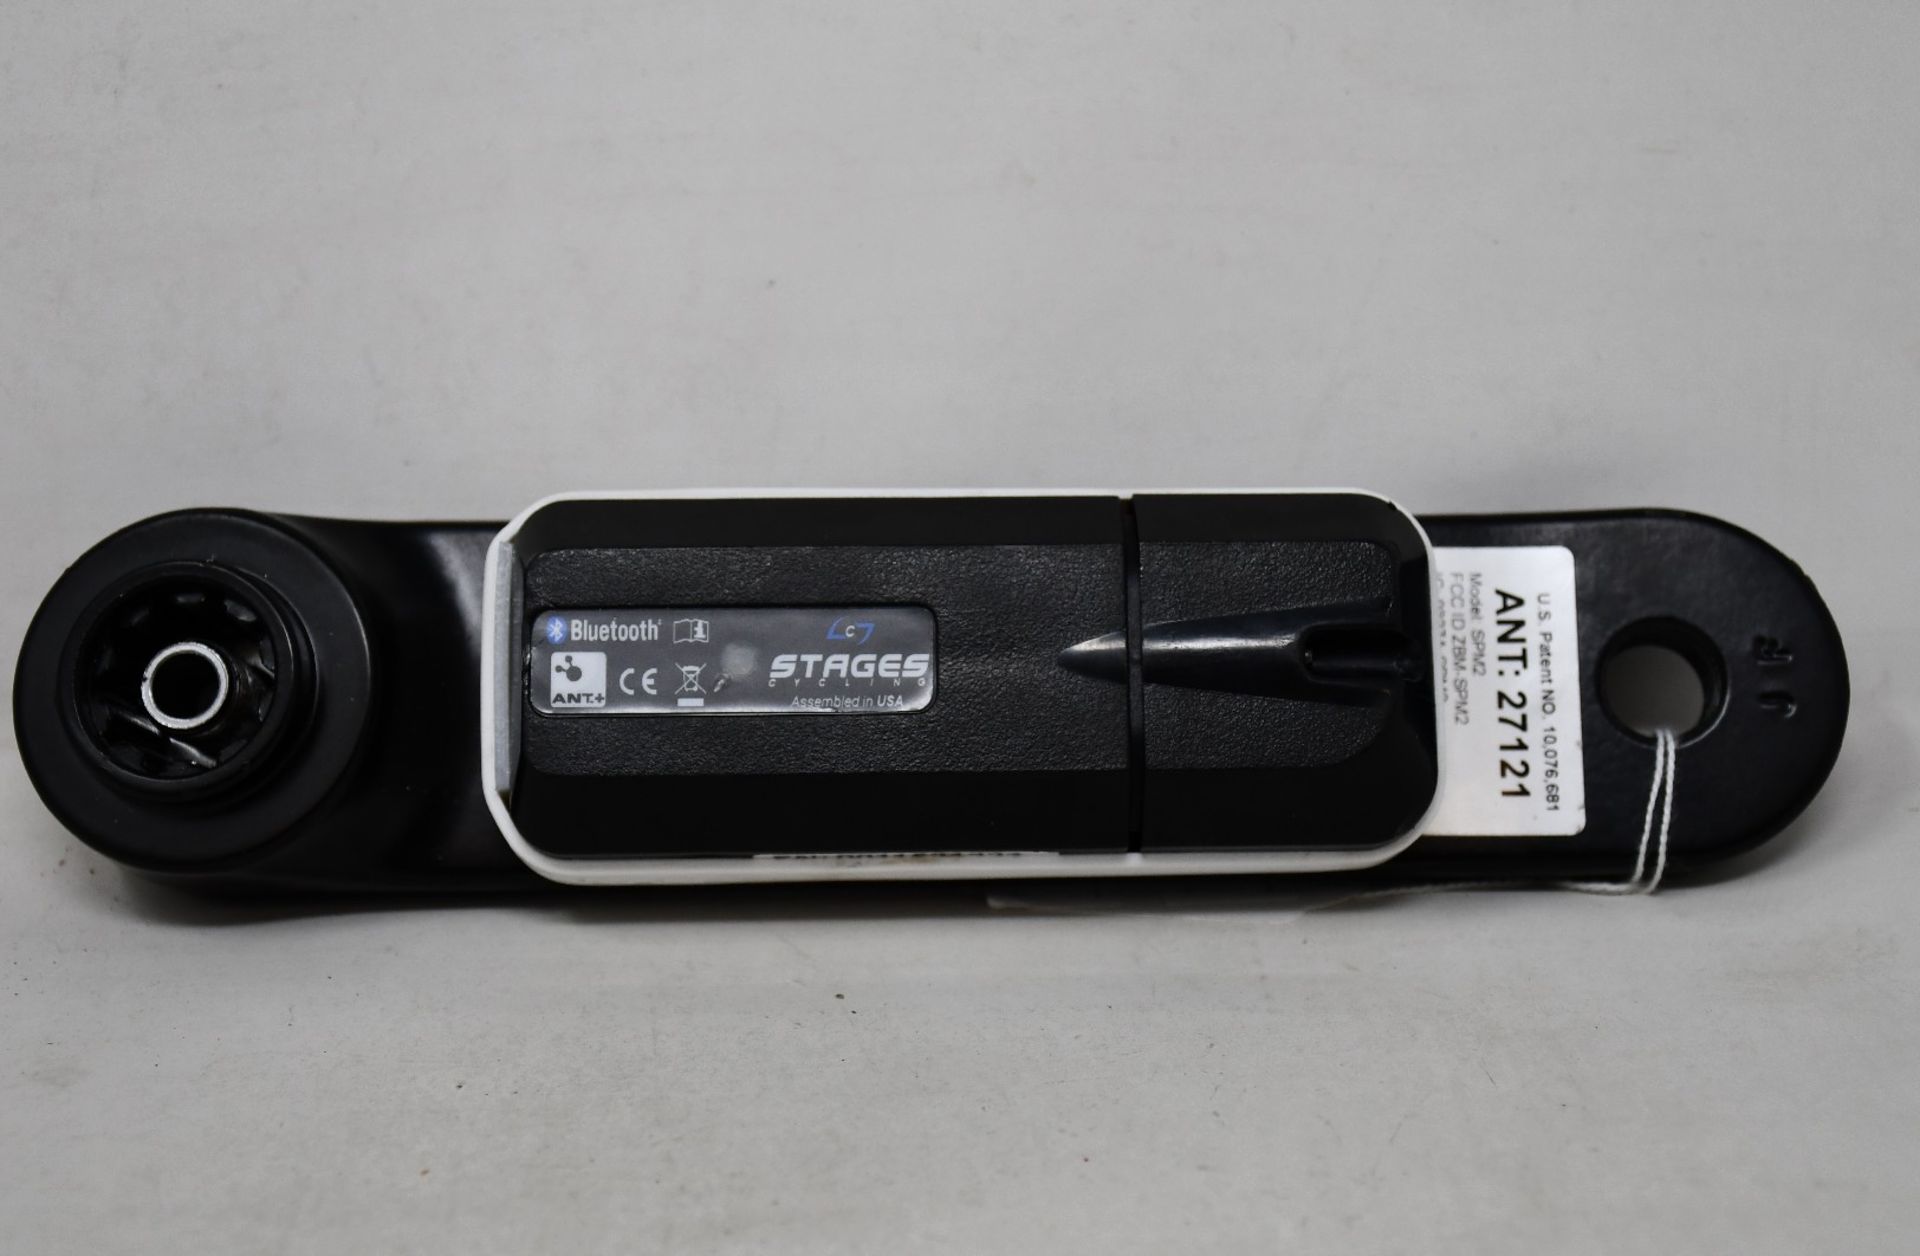 A Stages Power Cycling SPM2 indoor 3.1 power meter.